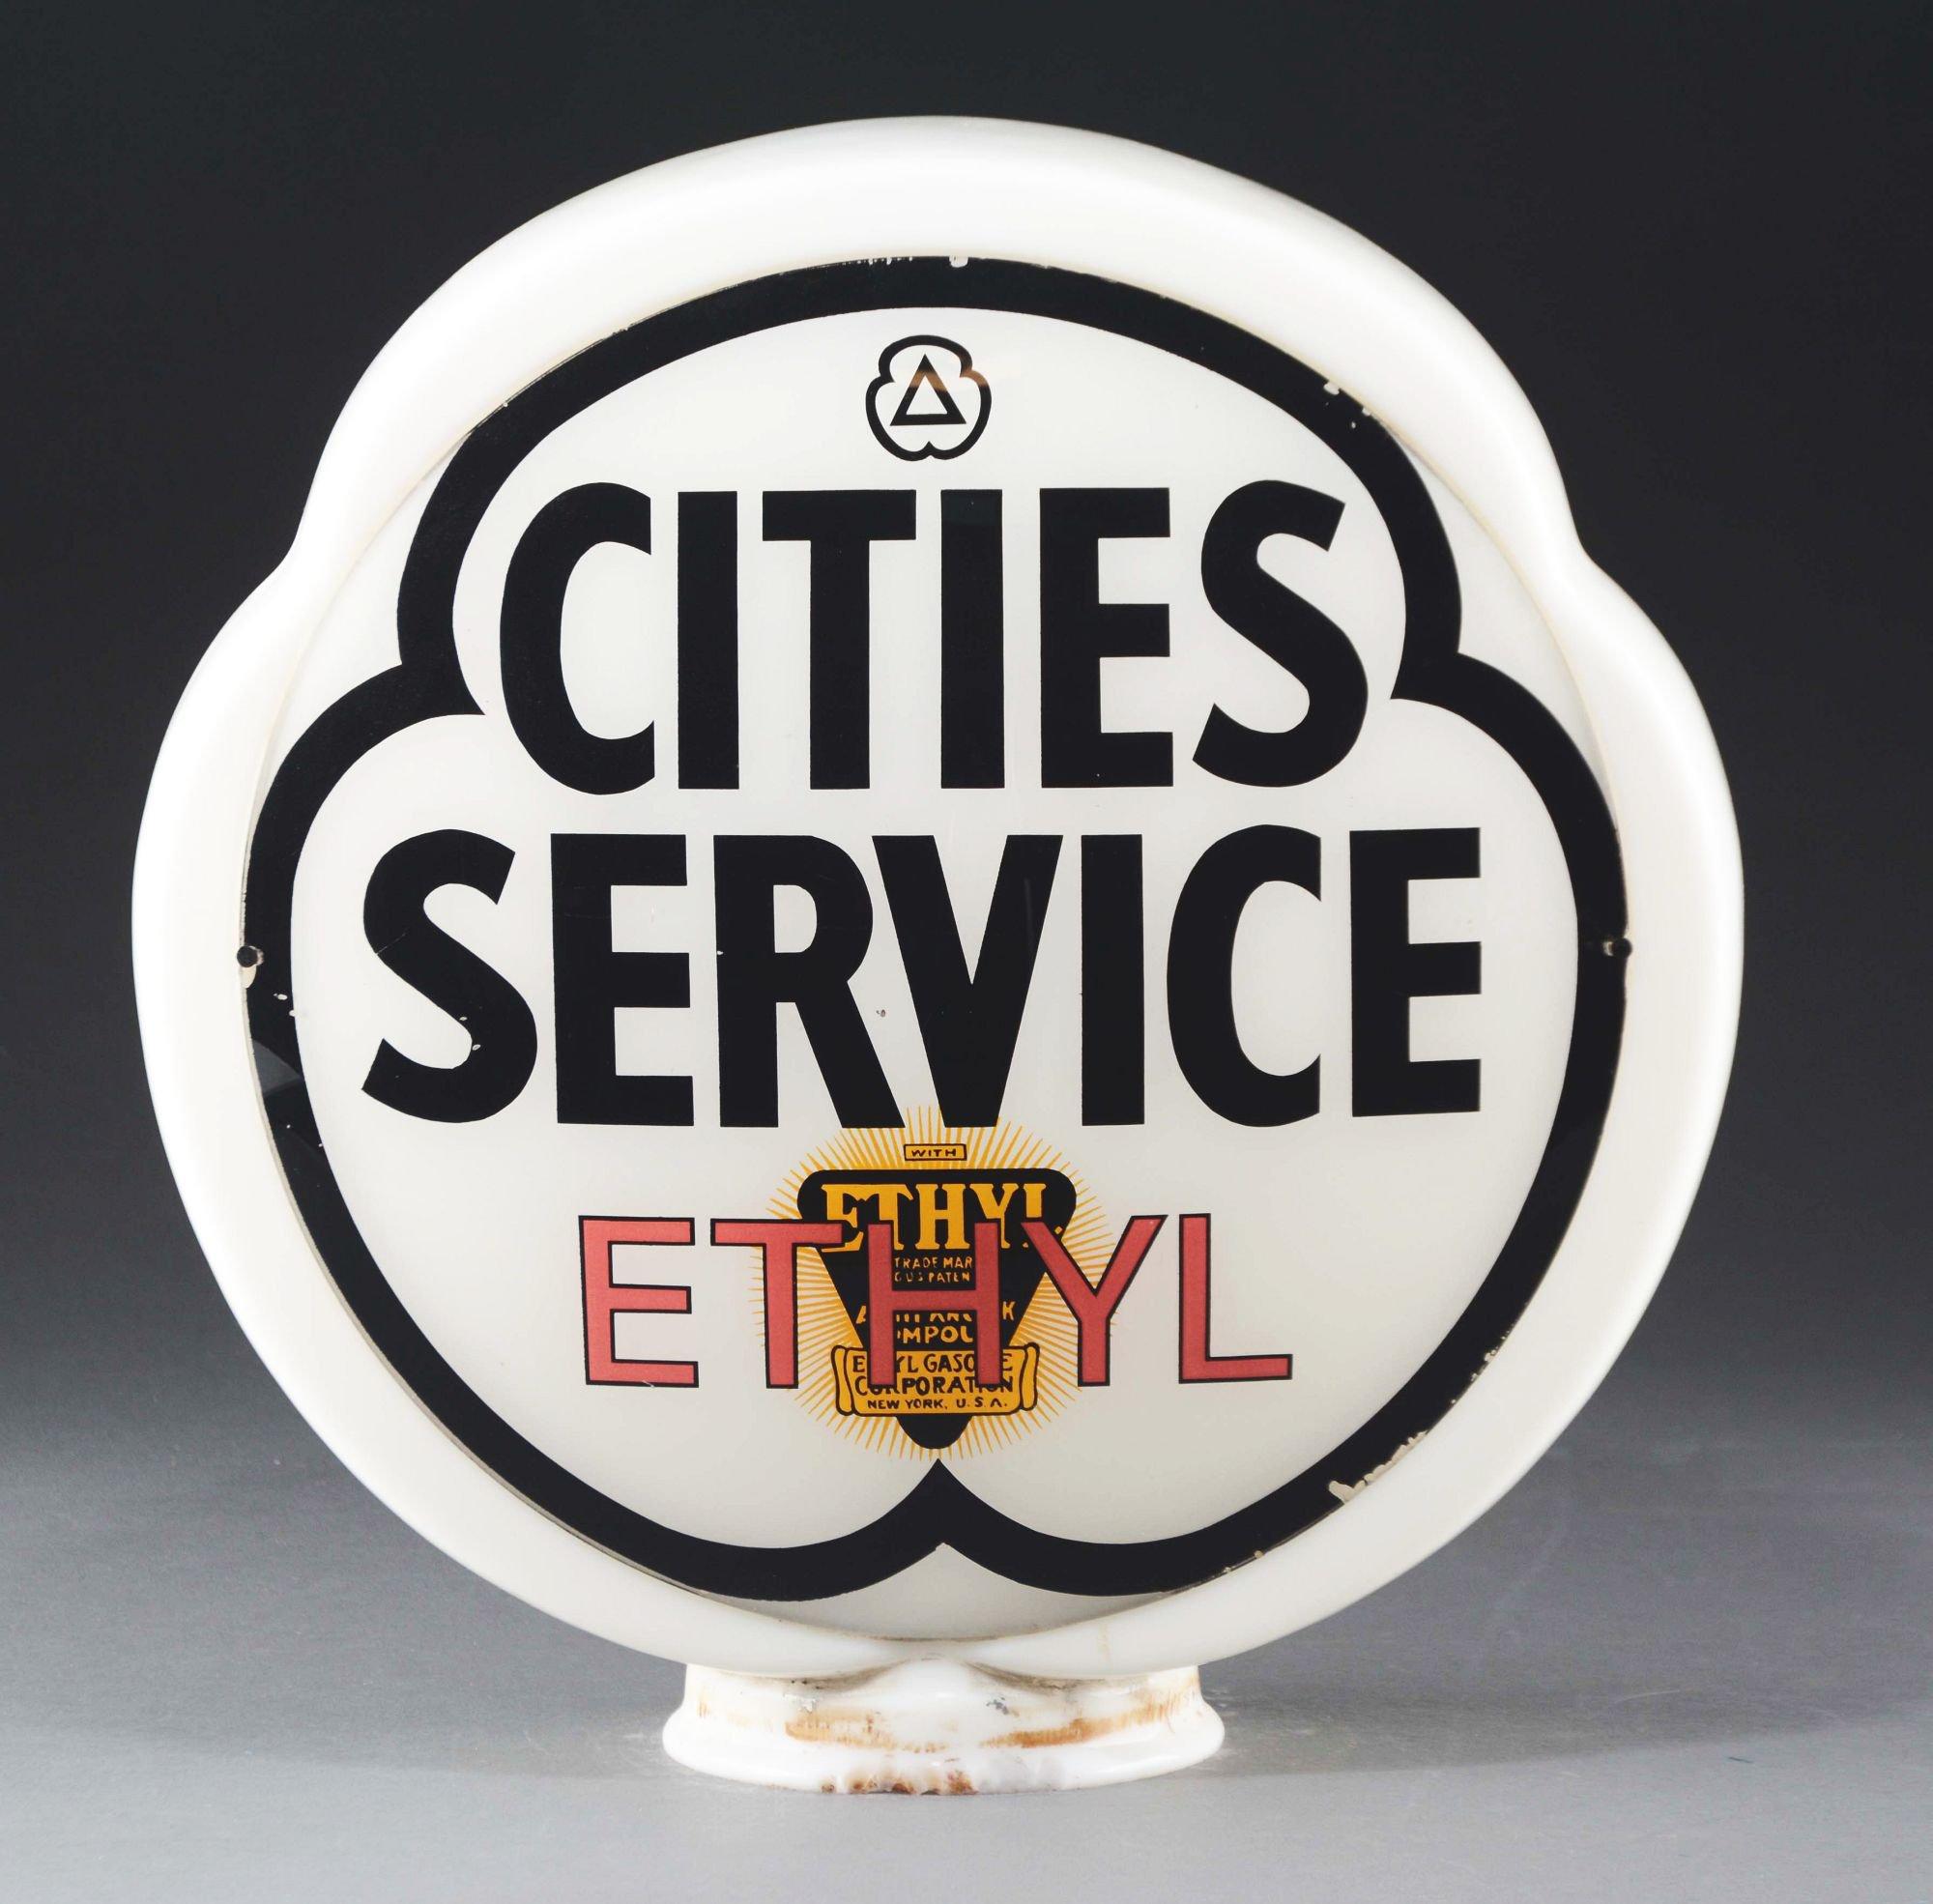 Cities Service Ethyl Complete Gas Globe.